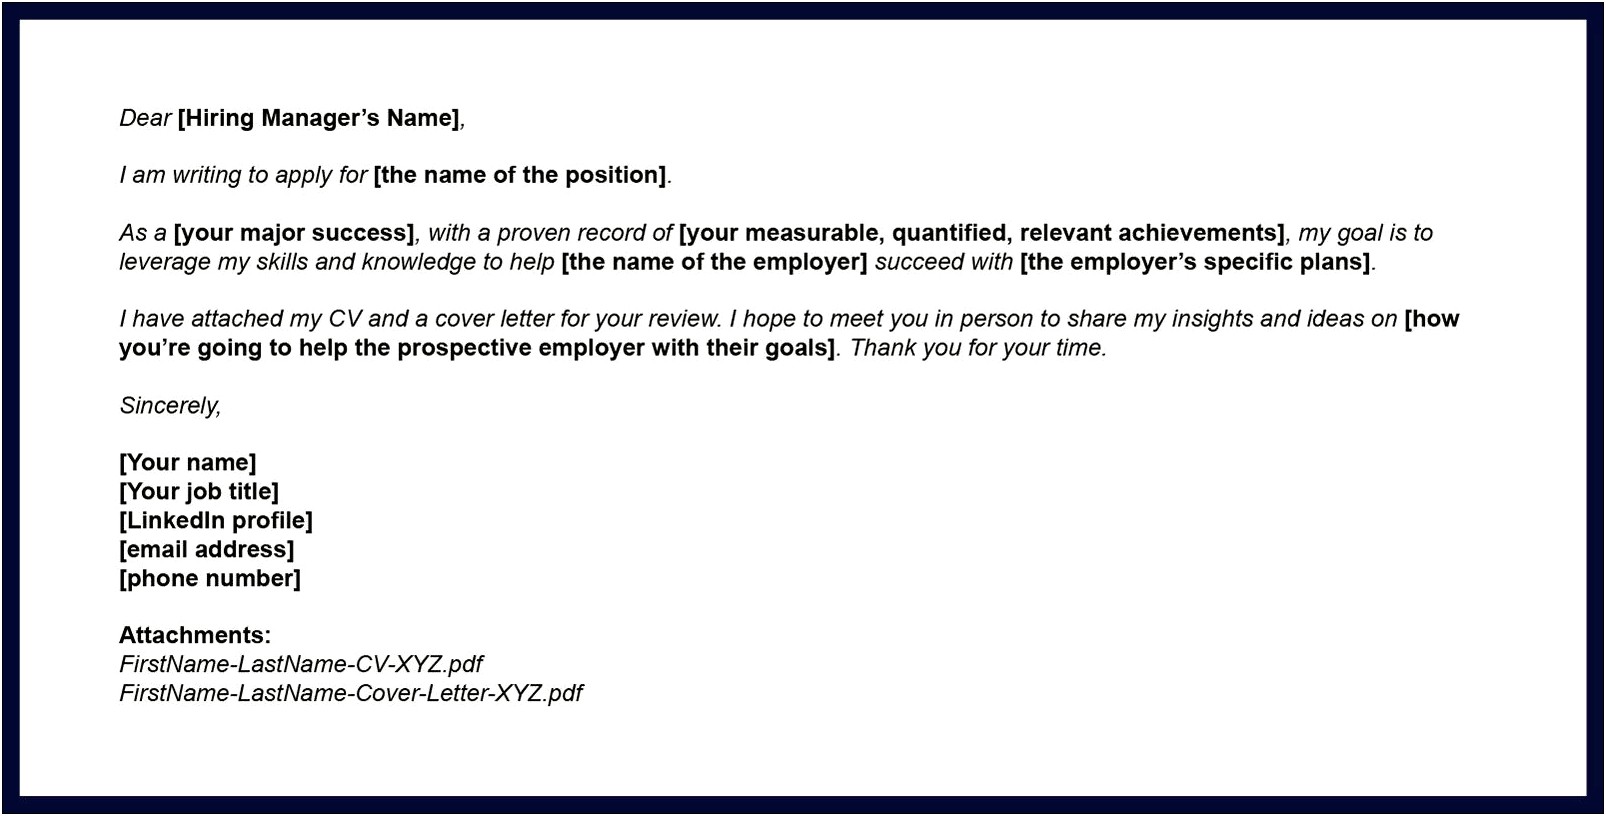 Send Email With Cover Letter And Resume